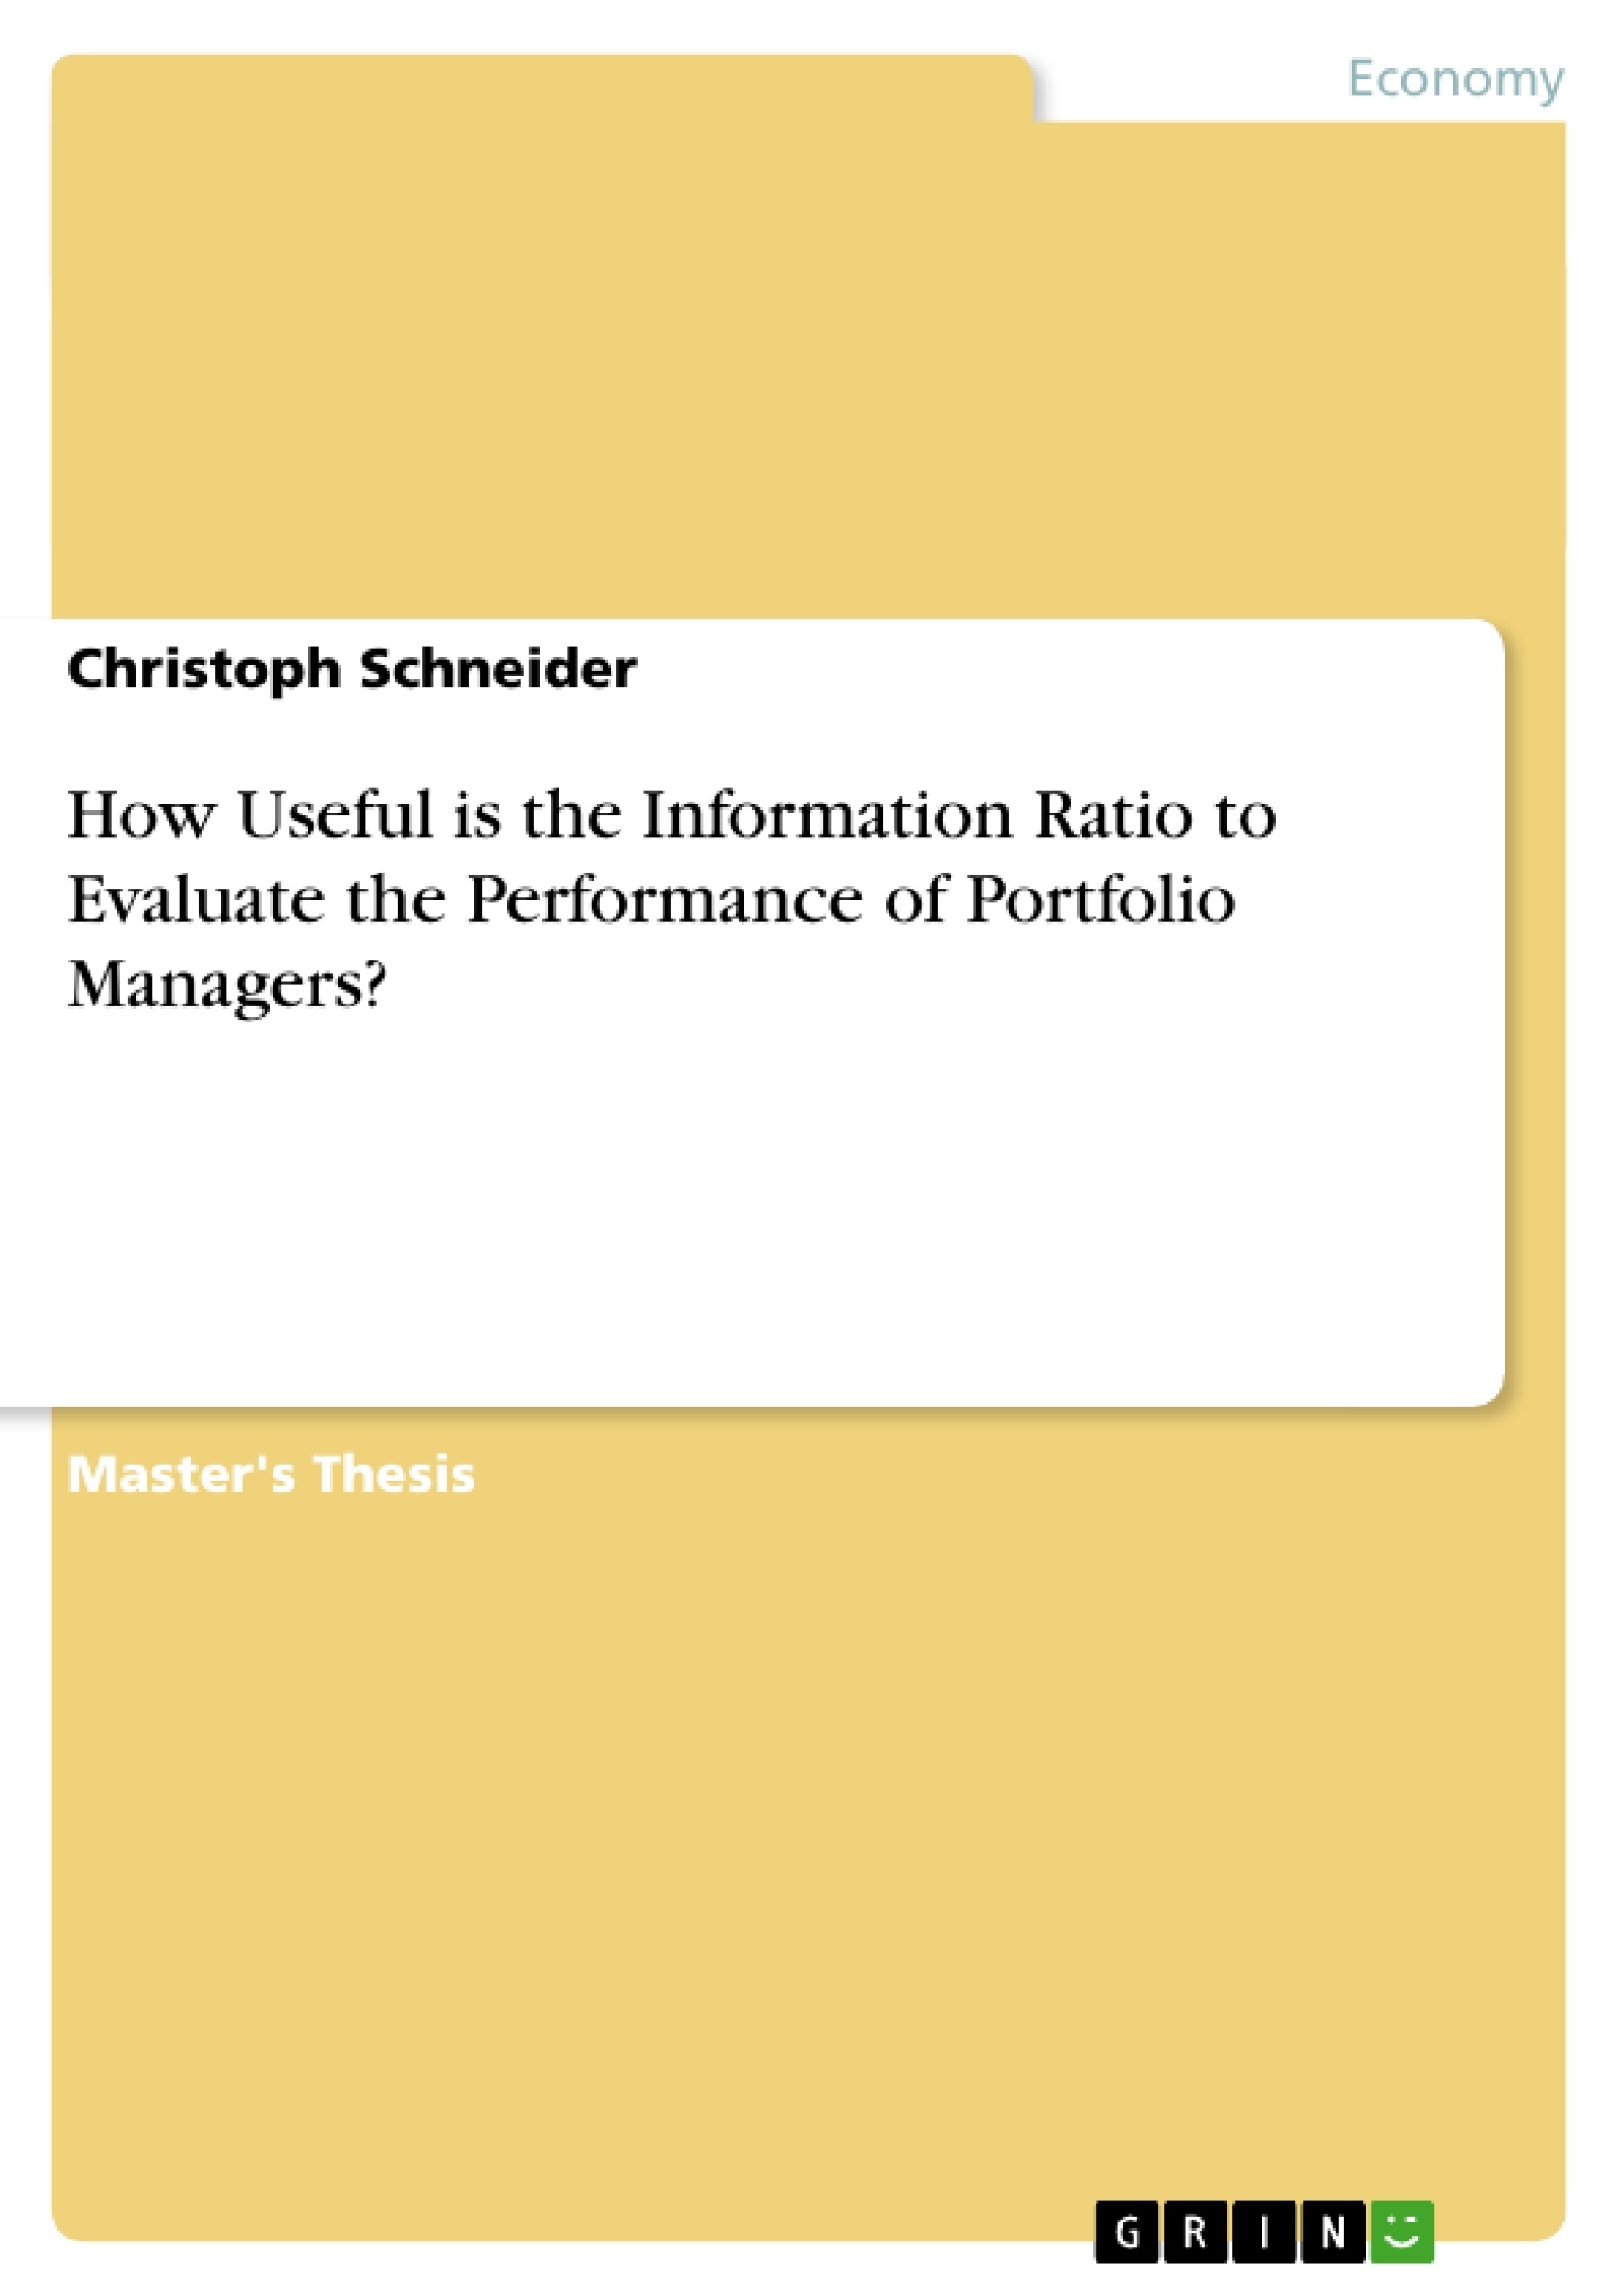 Title: How Useful is the Information Ratio to Evaluate the Performance of Portfolio Managers?